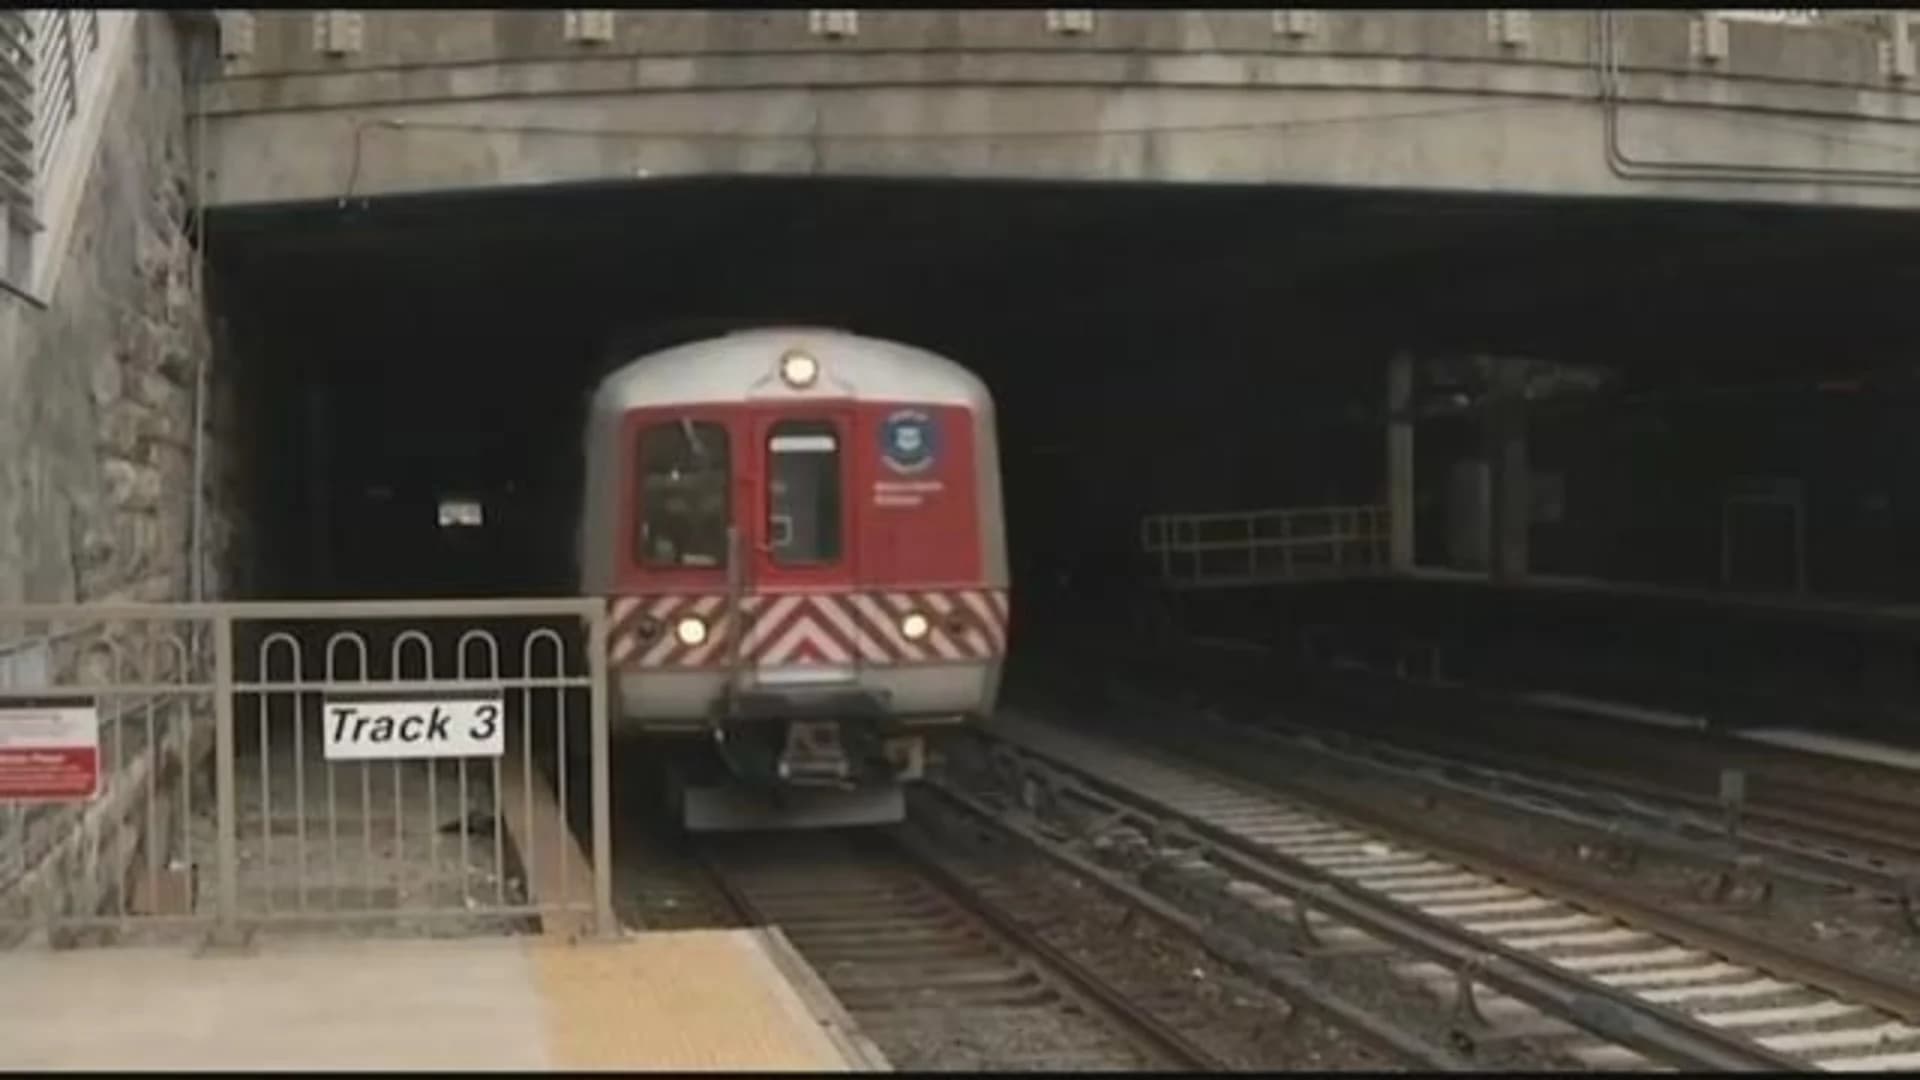 Mayor: Subway ridership up 18% from last month as phase three reopening begins